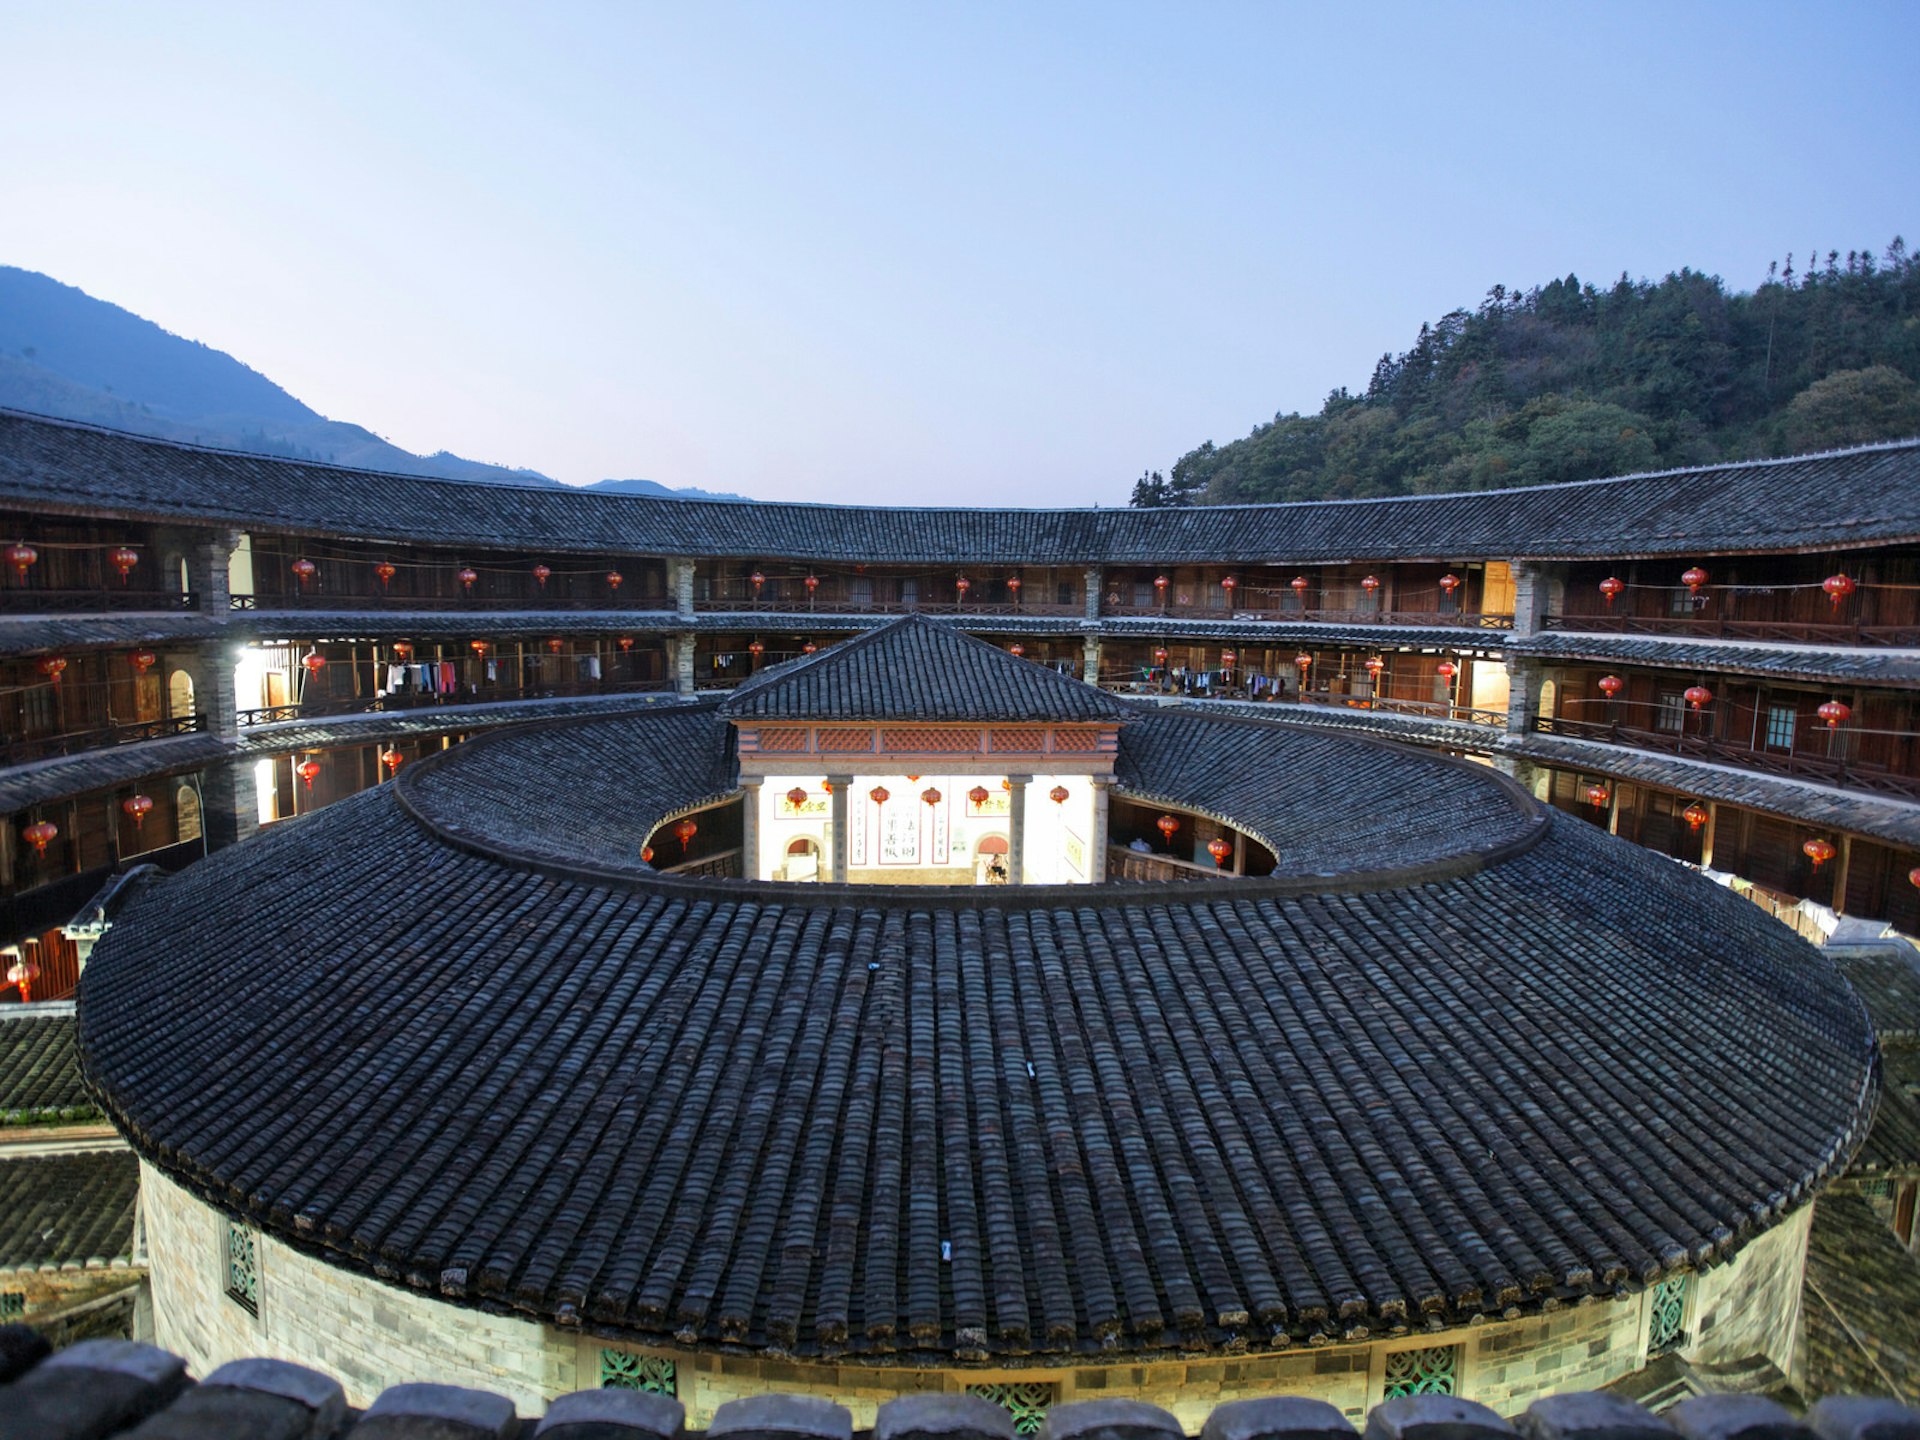 Stop off from the 'coastal train' in Fujian for a stay at a tulou (roundhouse) © JTB Photo / Getty